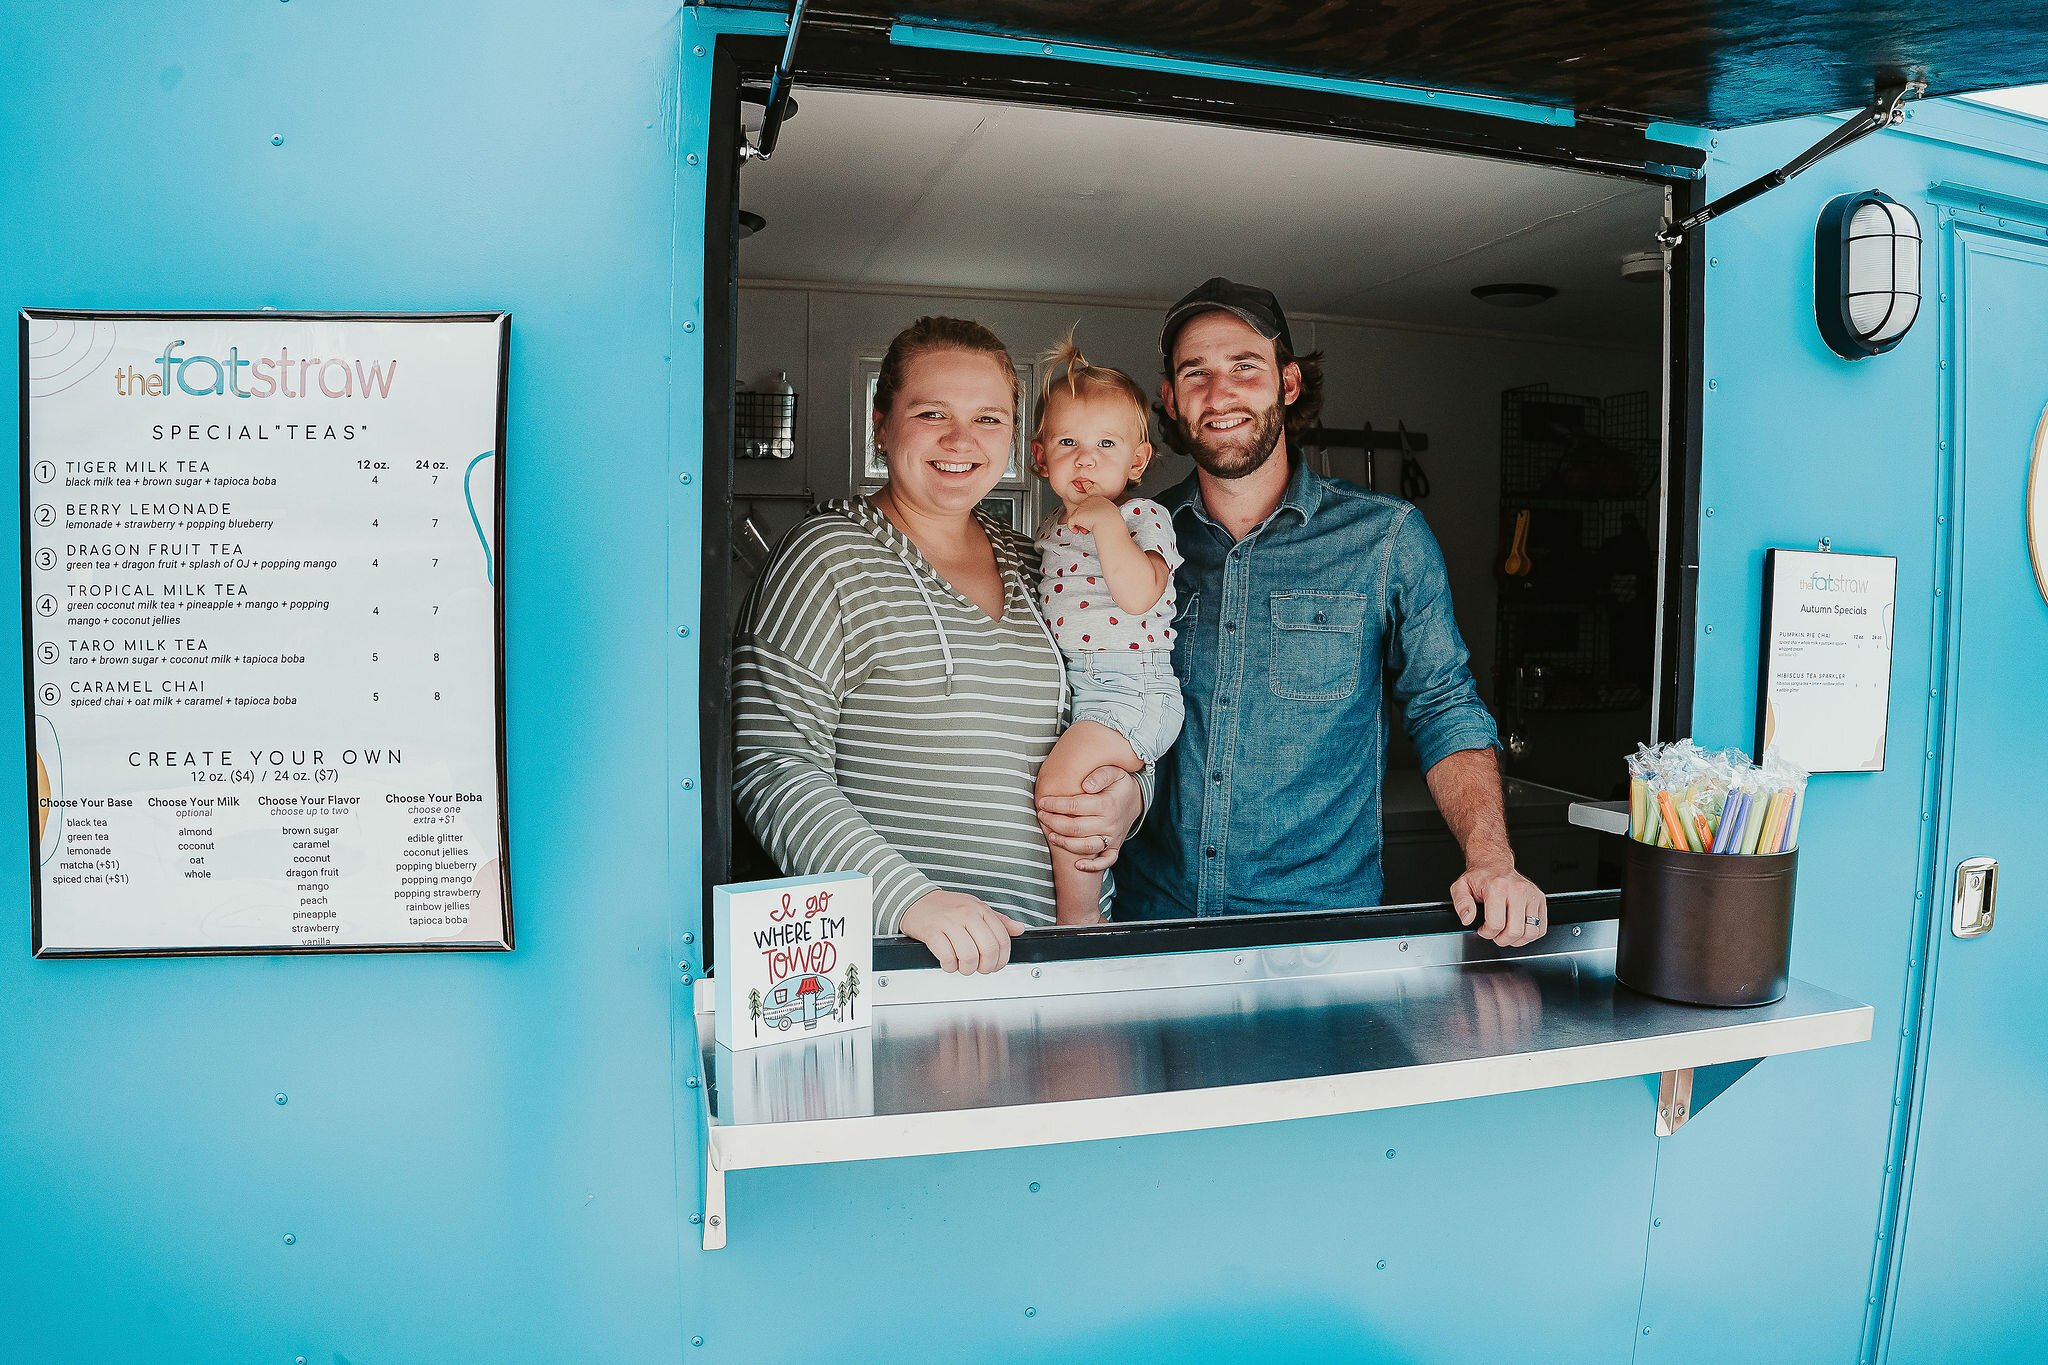 The Wiseman family can be found out and about at many local events in their new boba tea truck - The Fat Straw.